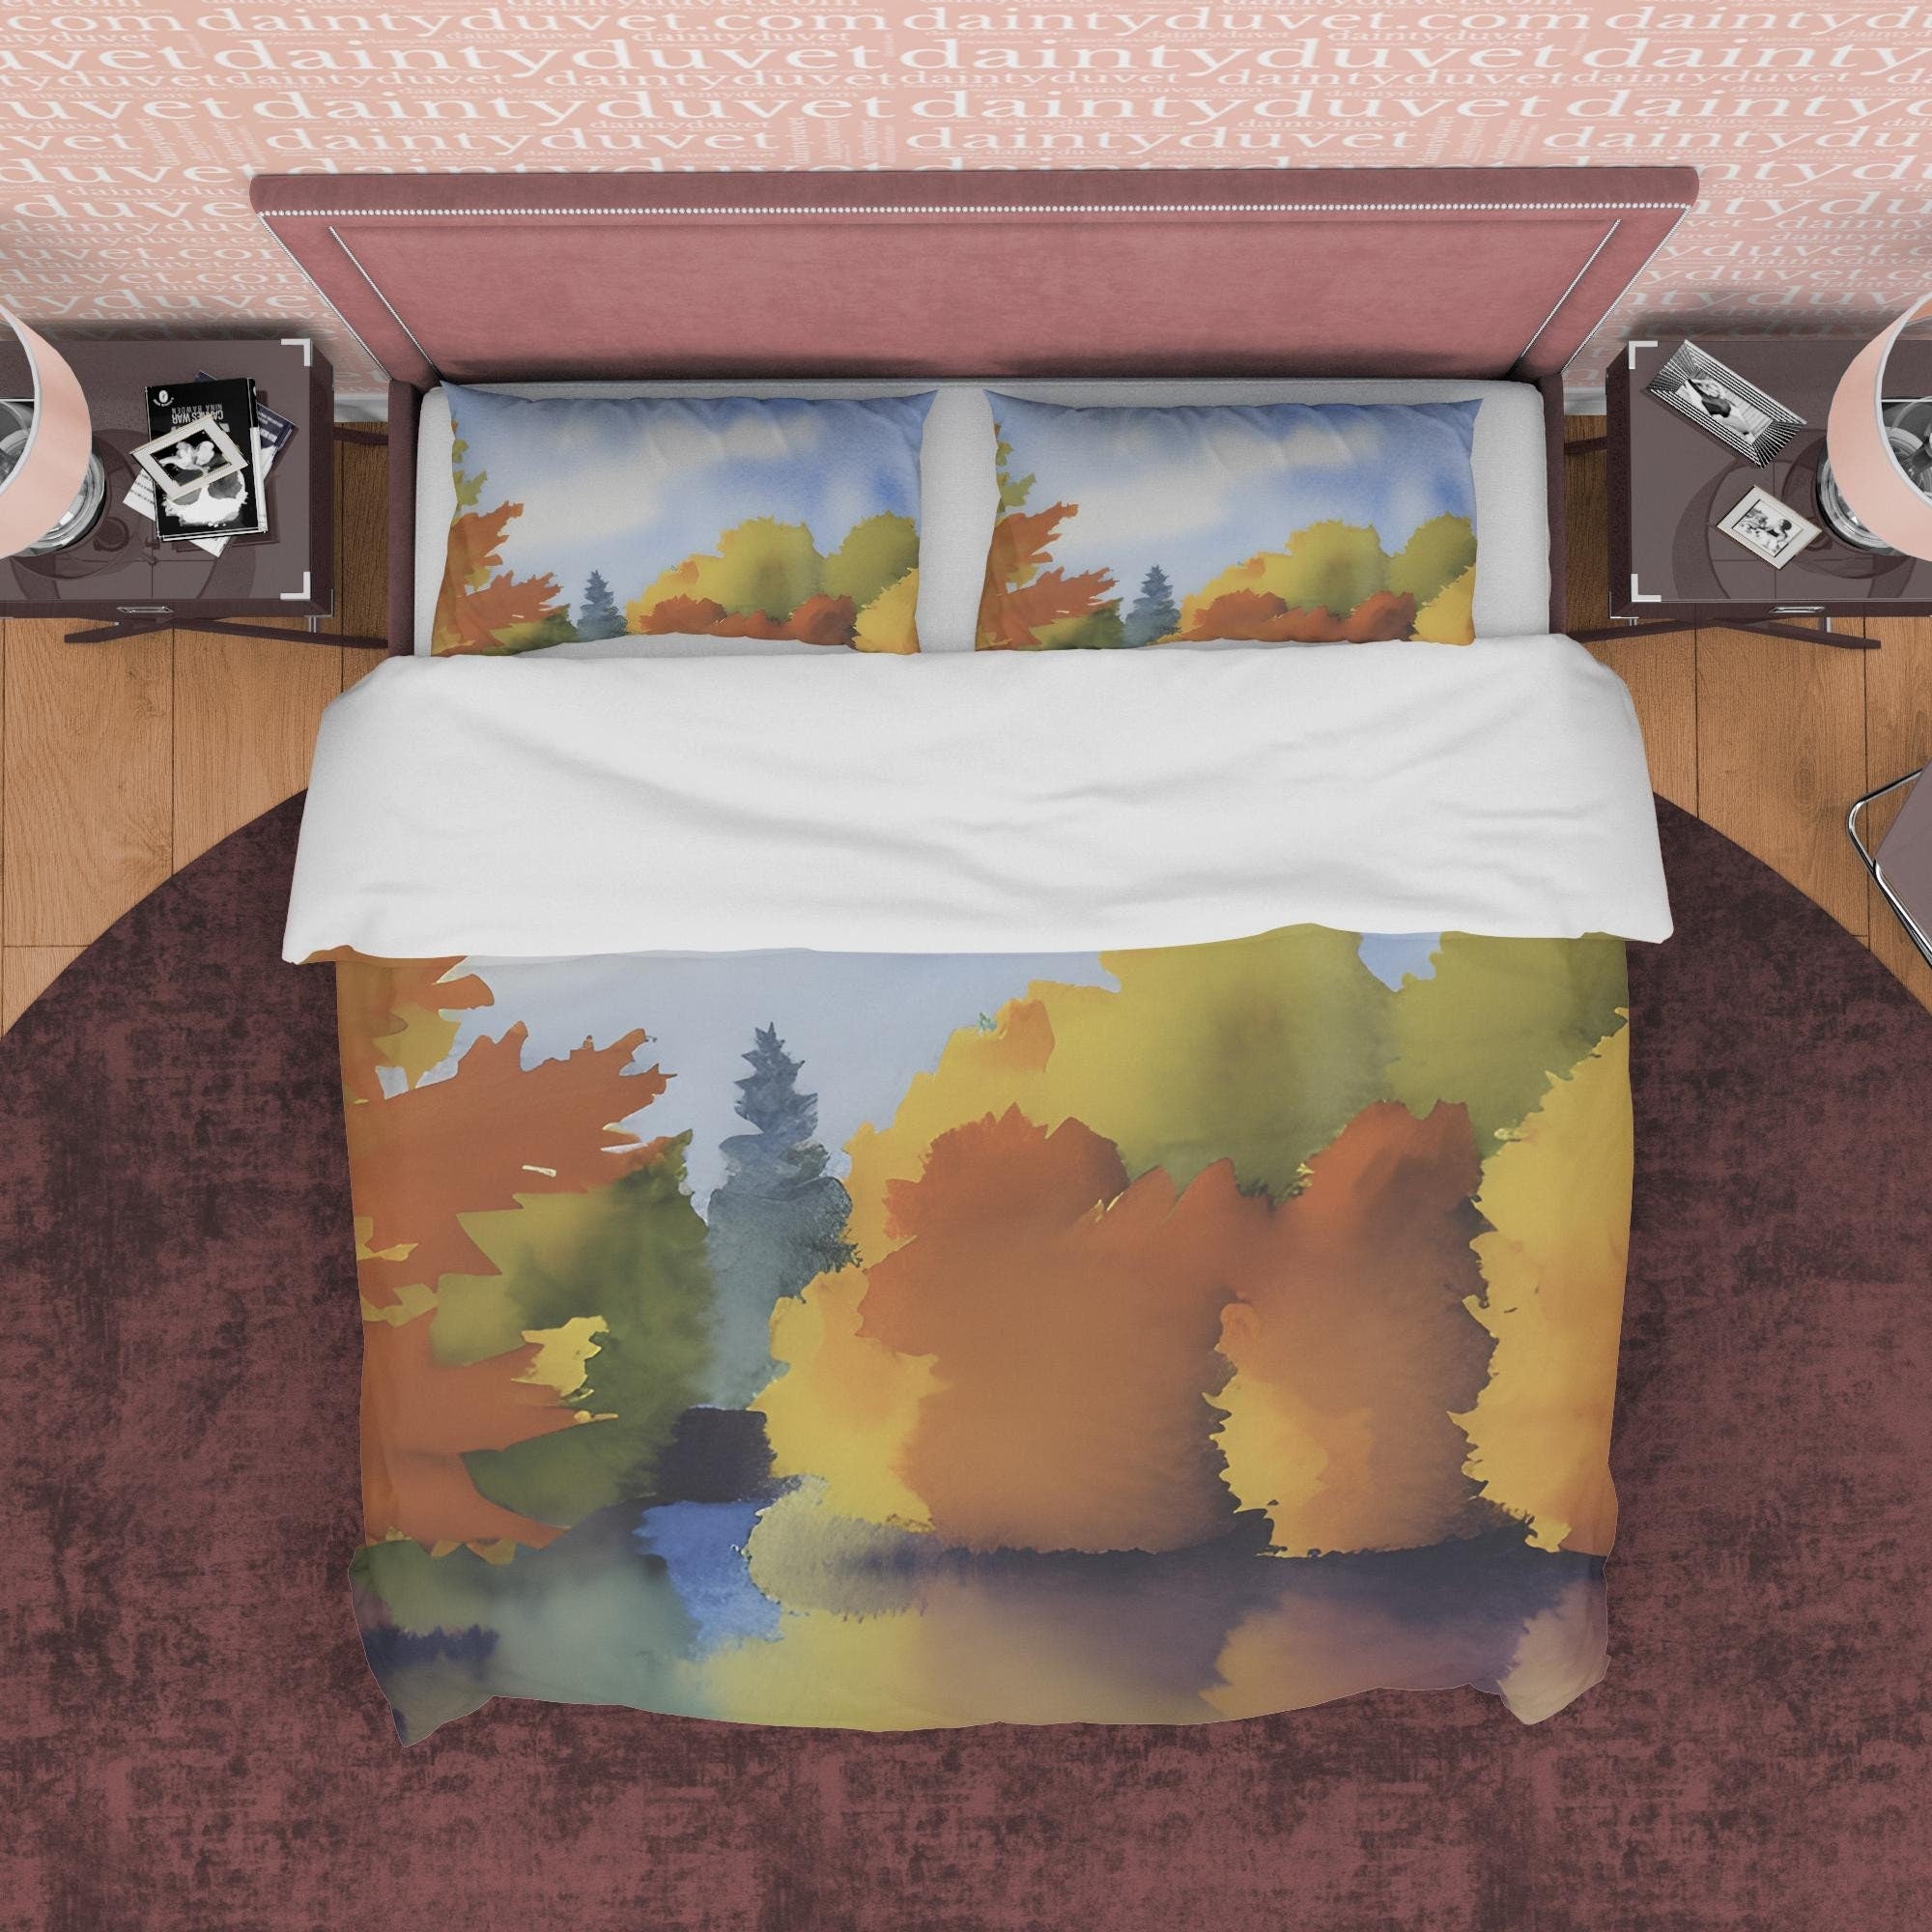 Blue Sky Fall Trees Reflection Duvet Cover Autumn Bedding Set, Warm Autumn Colors Printed Quilt Cover, Foliage Bedspread